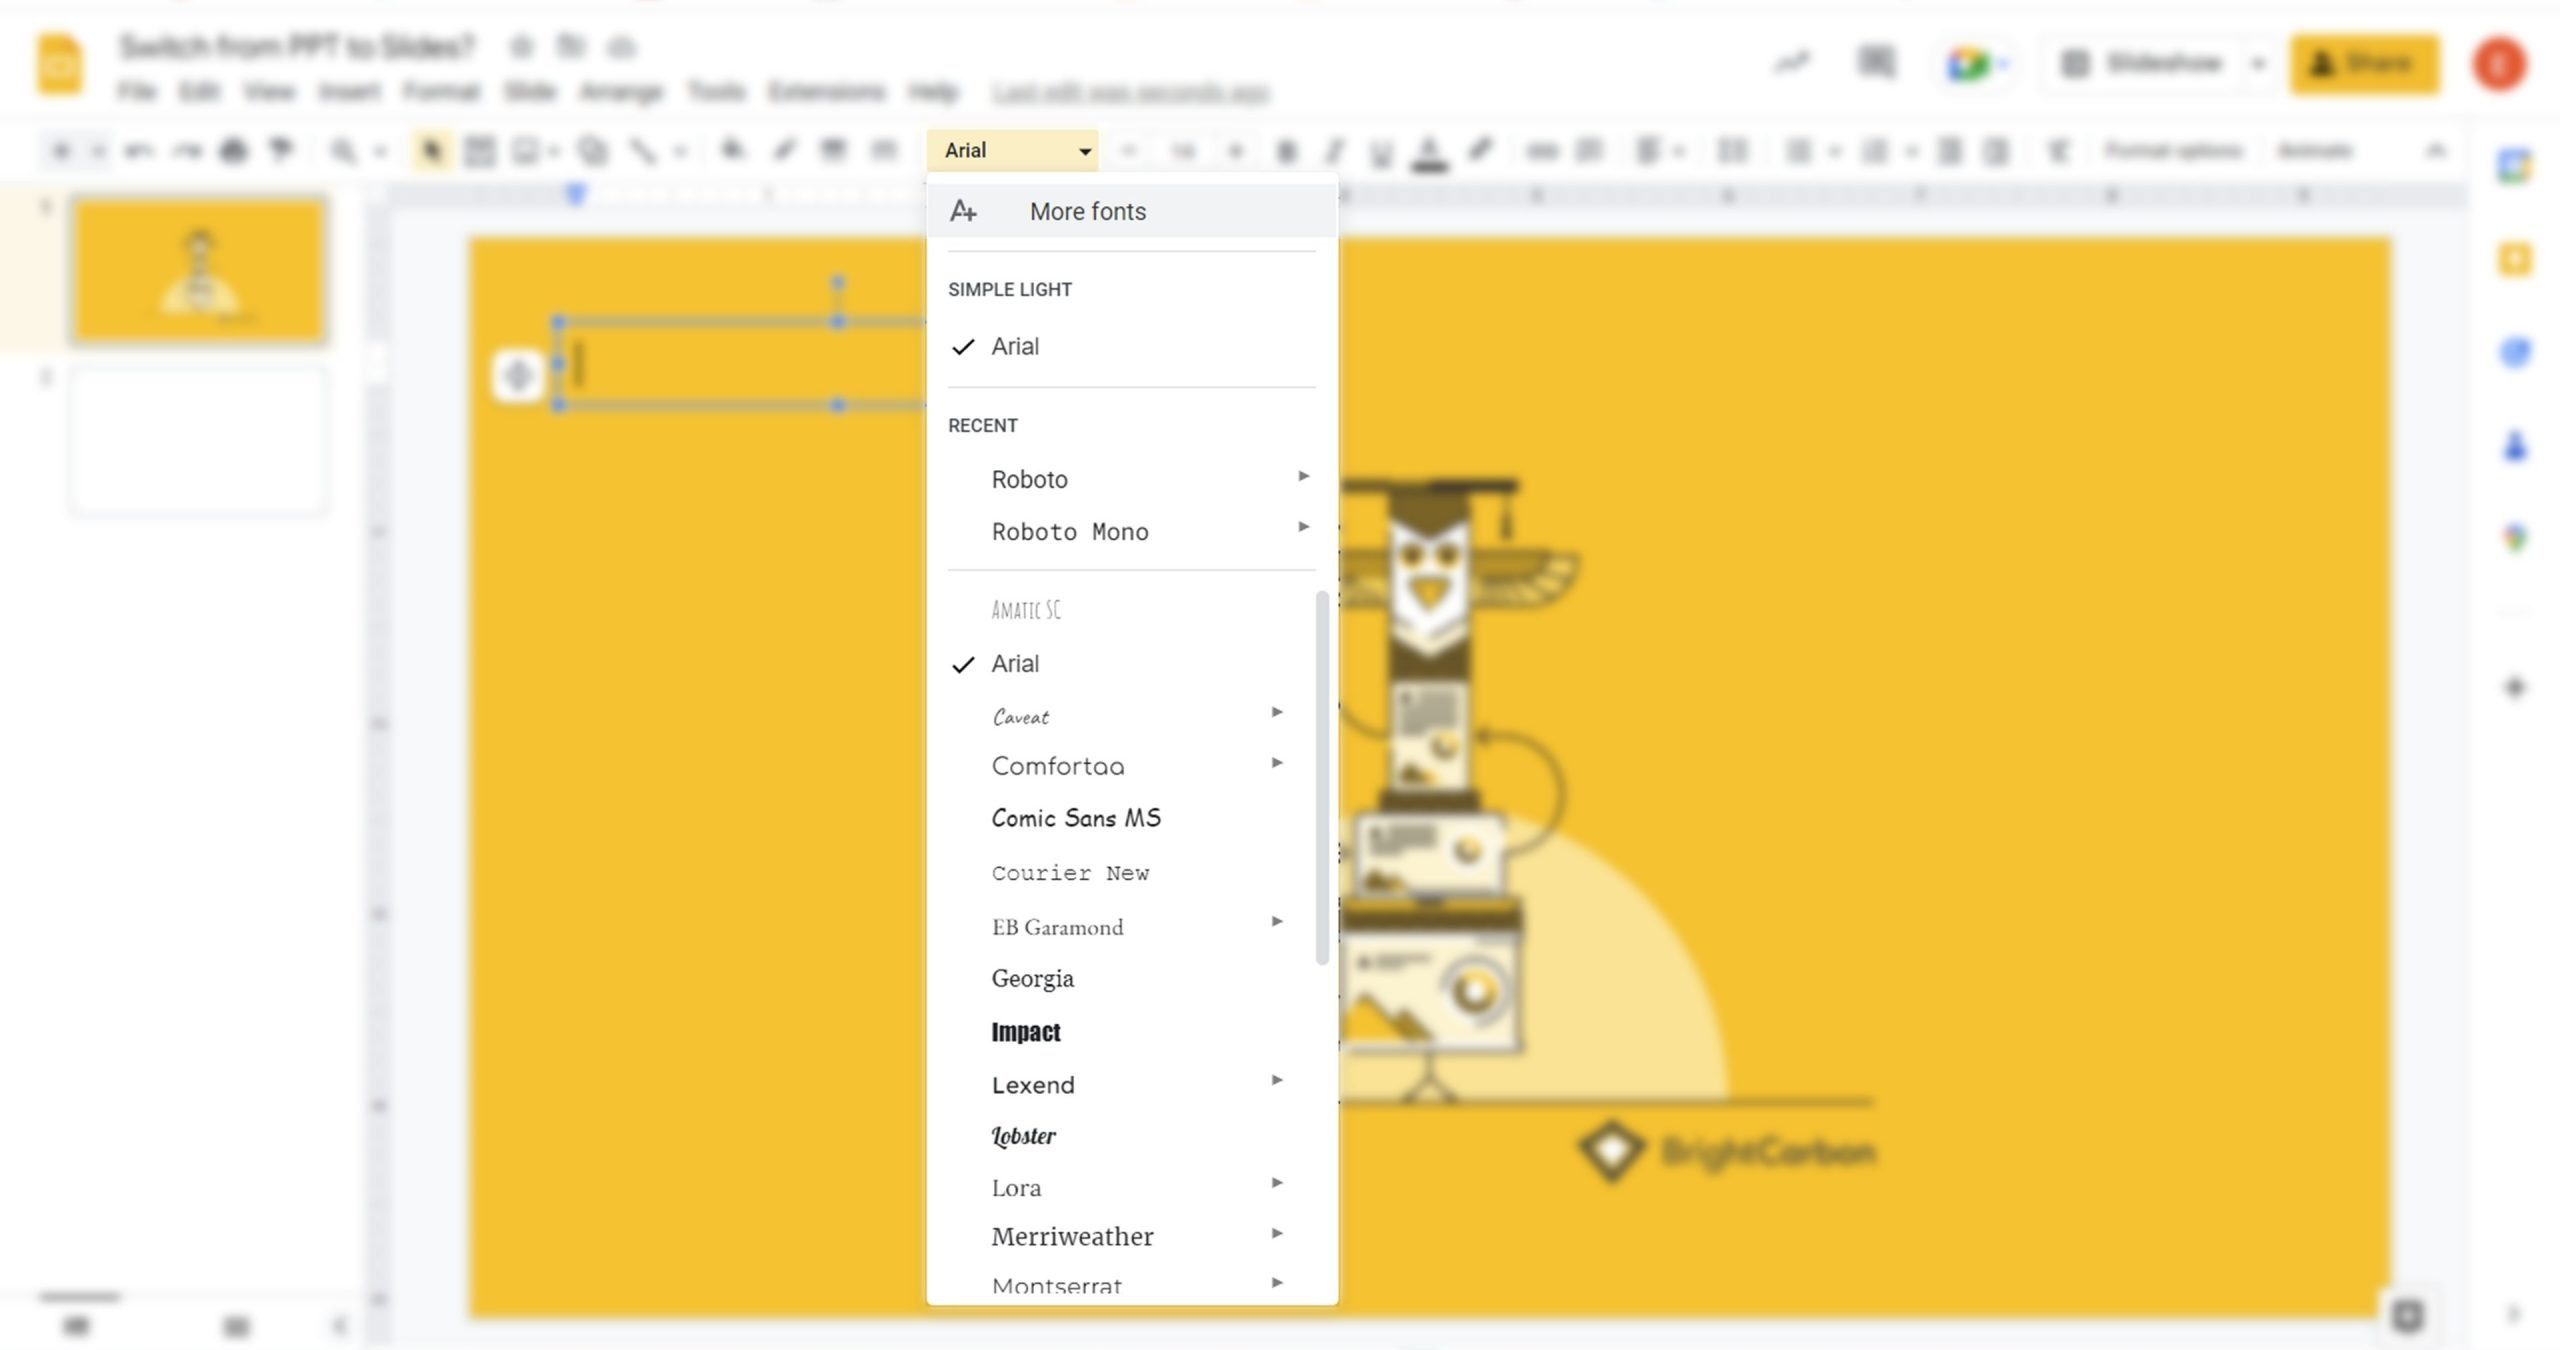 Screenshot of the fonts drop down menu in Google Slides showing the add more fonts option